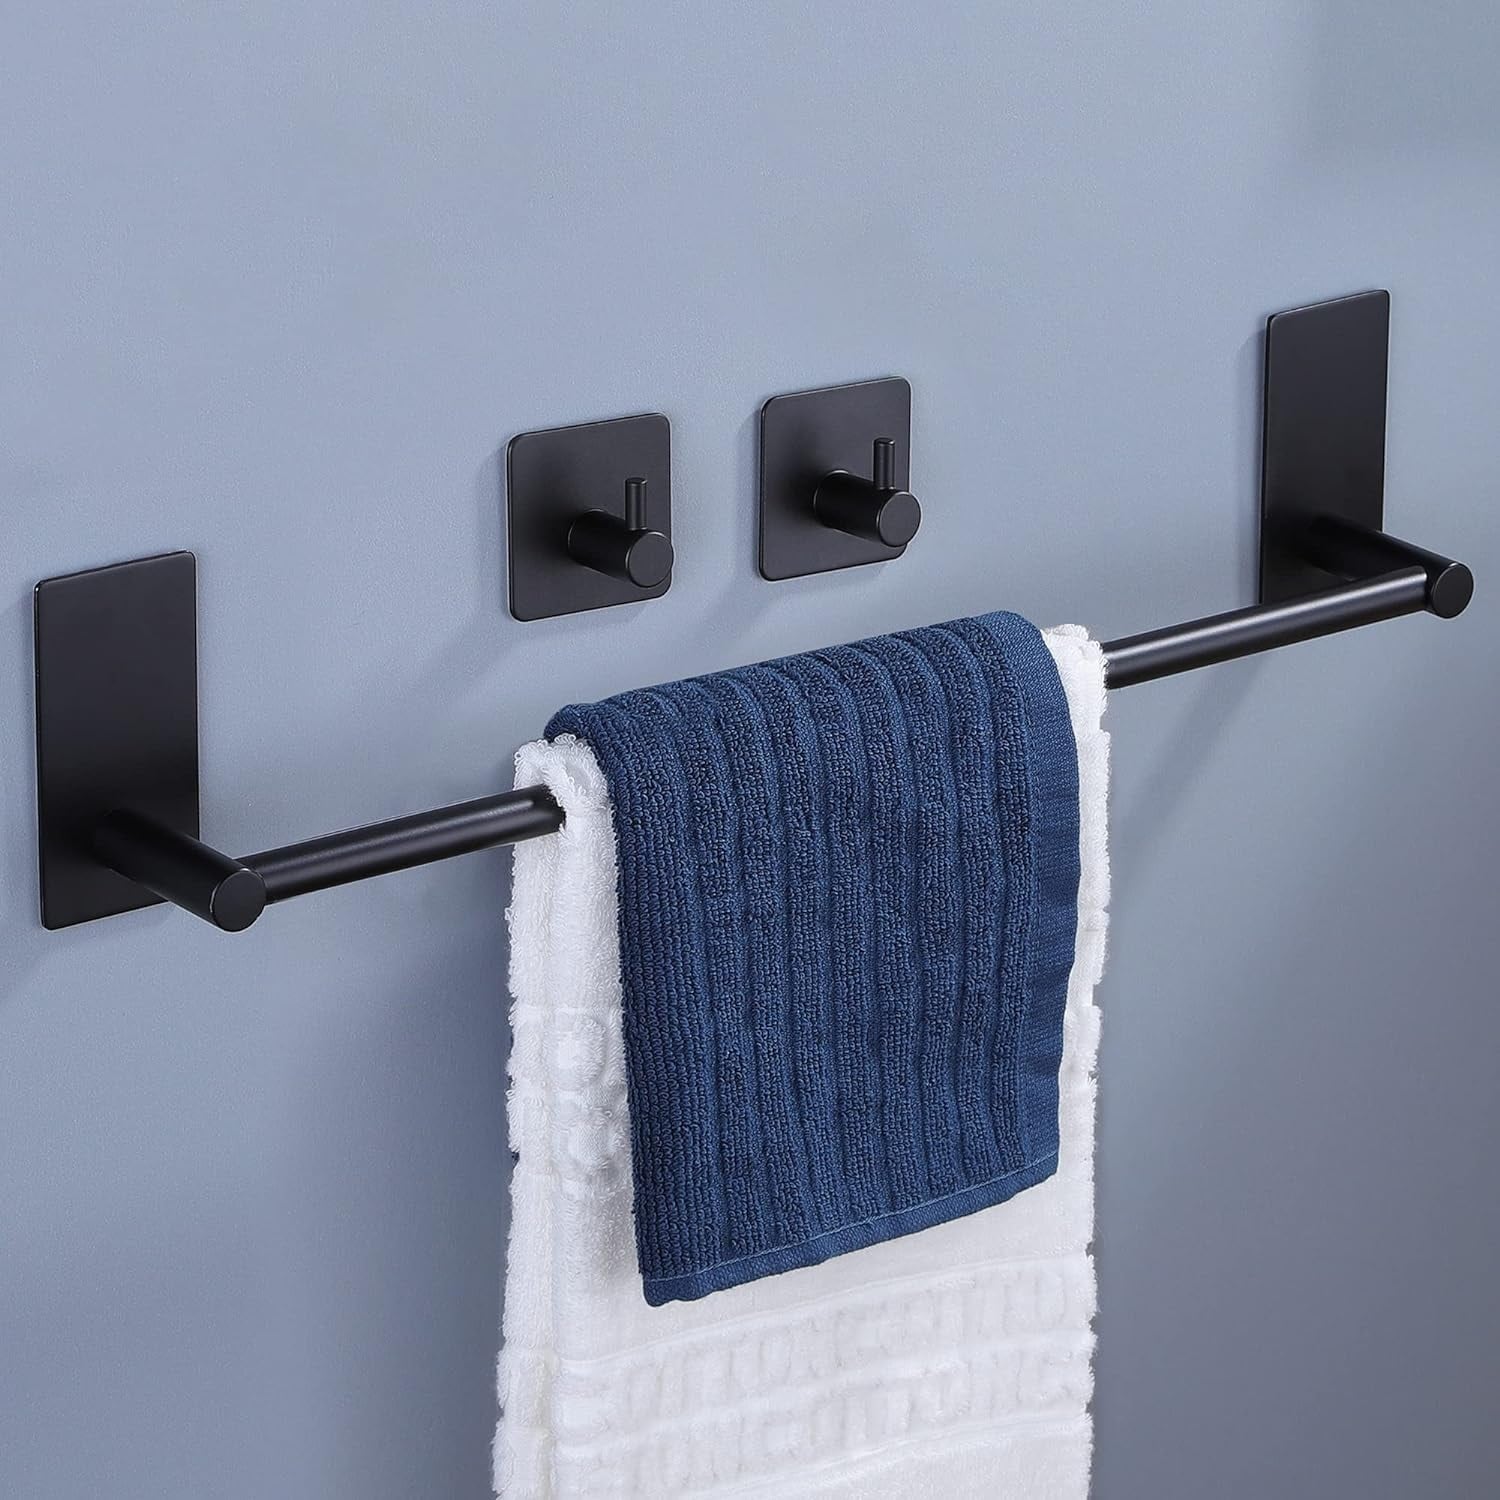 Search for Adhesive Towel Bar  Discover our Best Deals at Bed